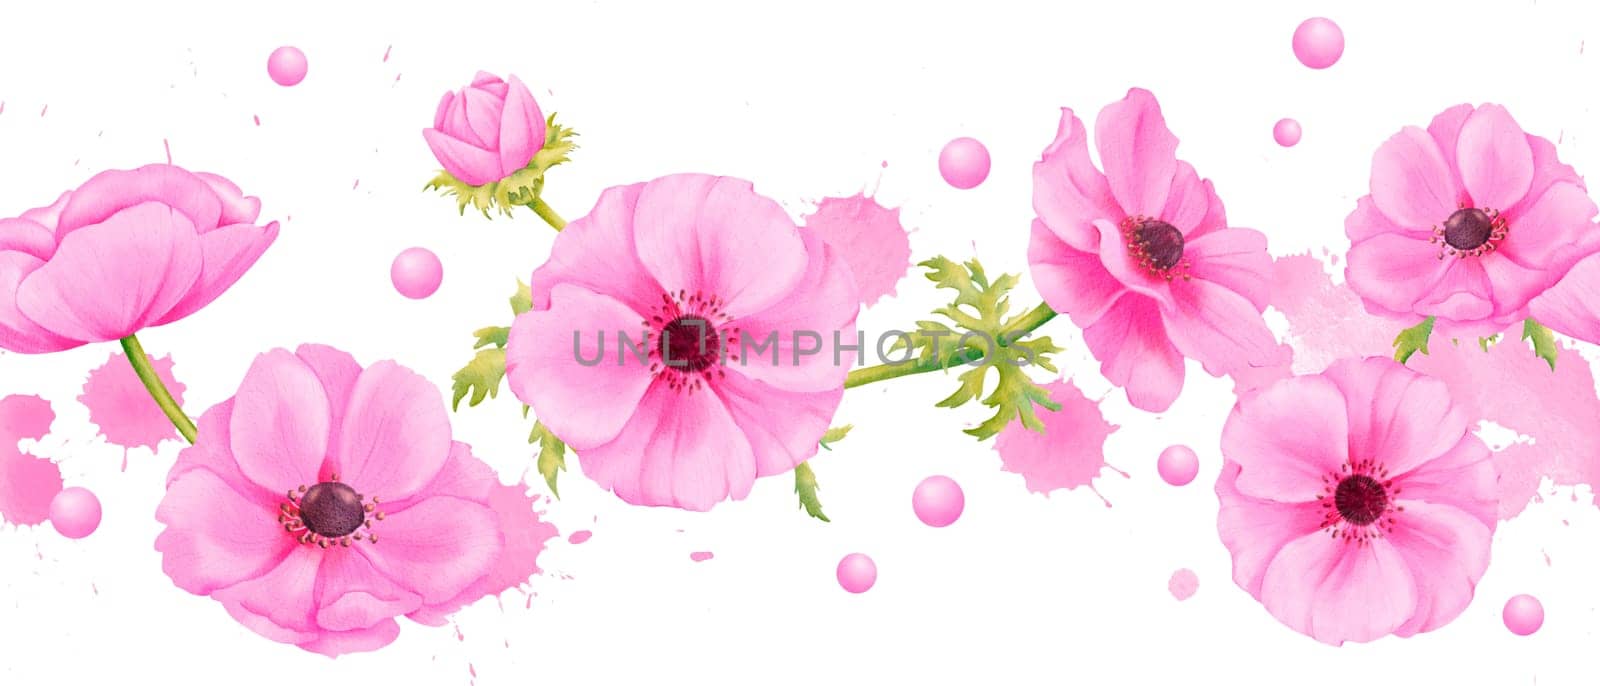 A seamless border featuring delicate pink anemones, adorned with rhinestones. watercolor illustration with soft water droplets and splashes. for embellishing wedding invitations, greeting cards by Art_Mari_Ka